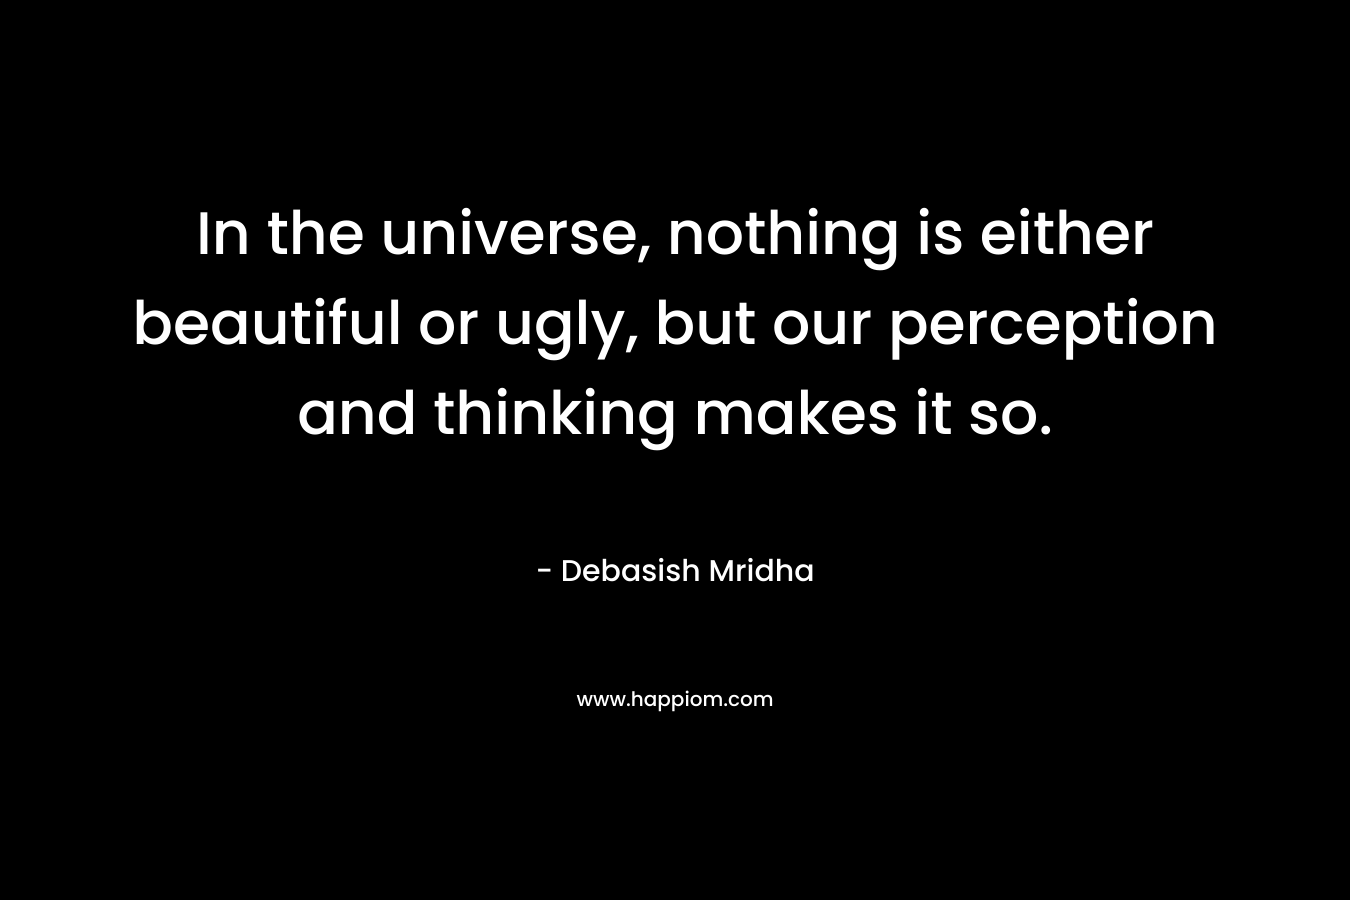 In the universe, nothing is either beautiful or ugly, but our perception and thinking makes it so.